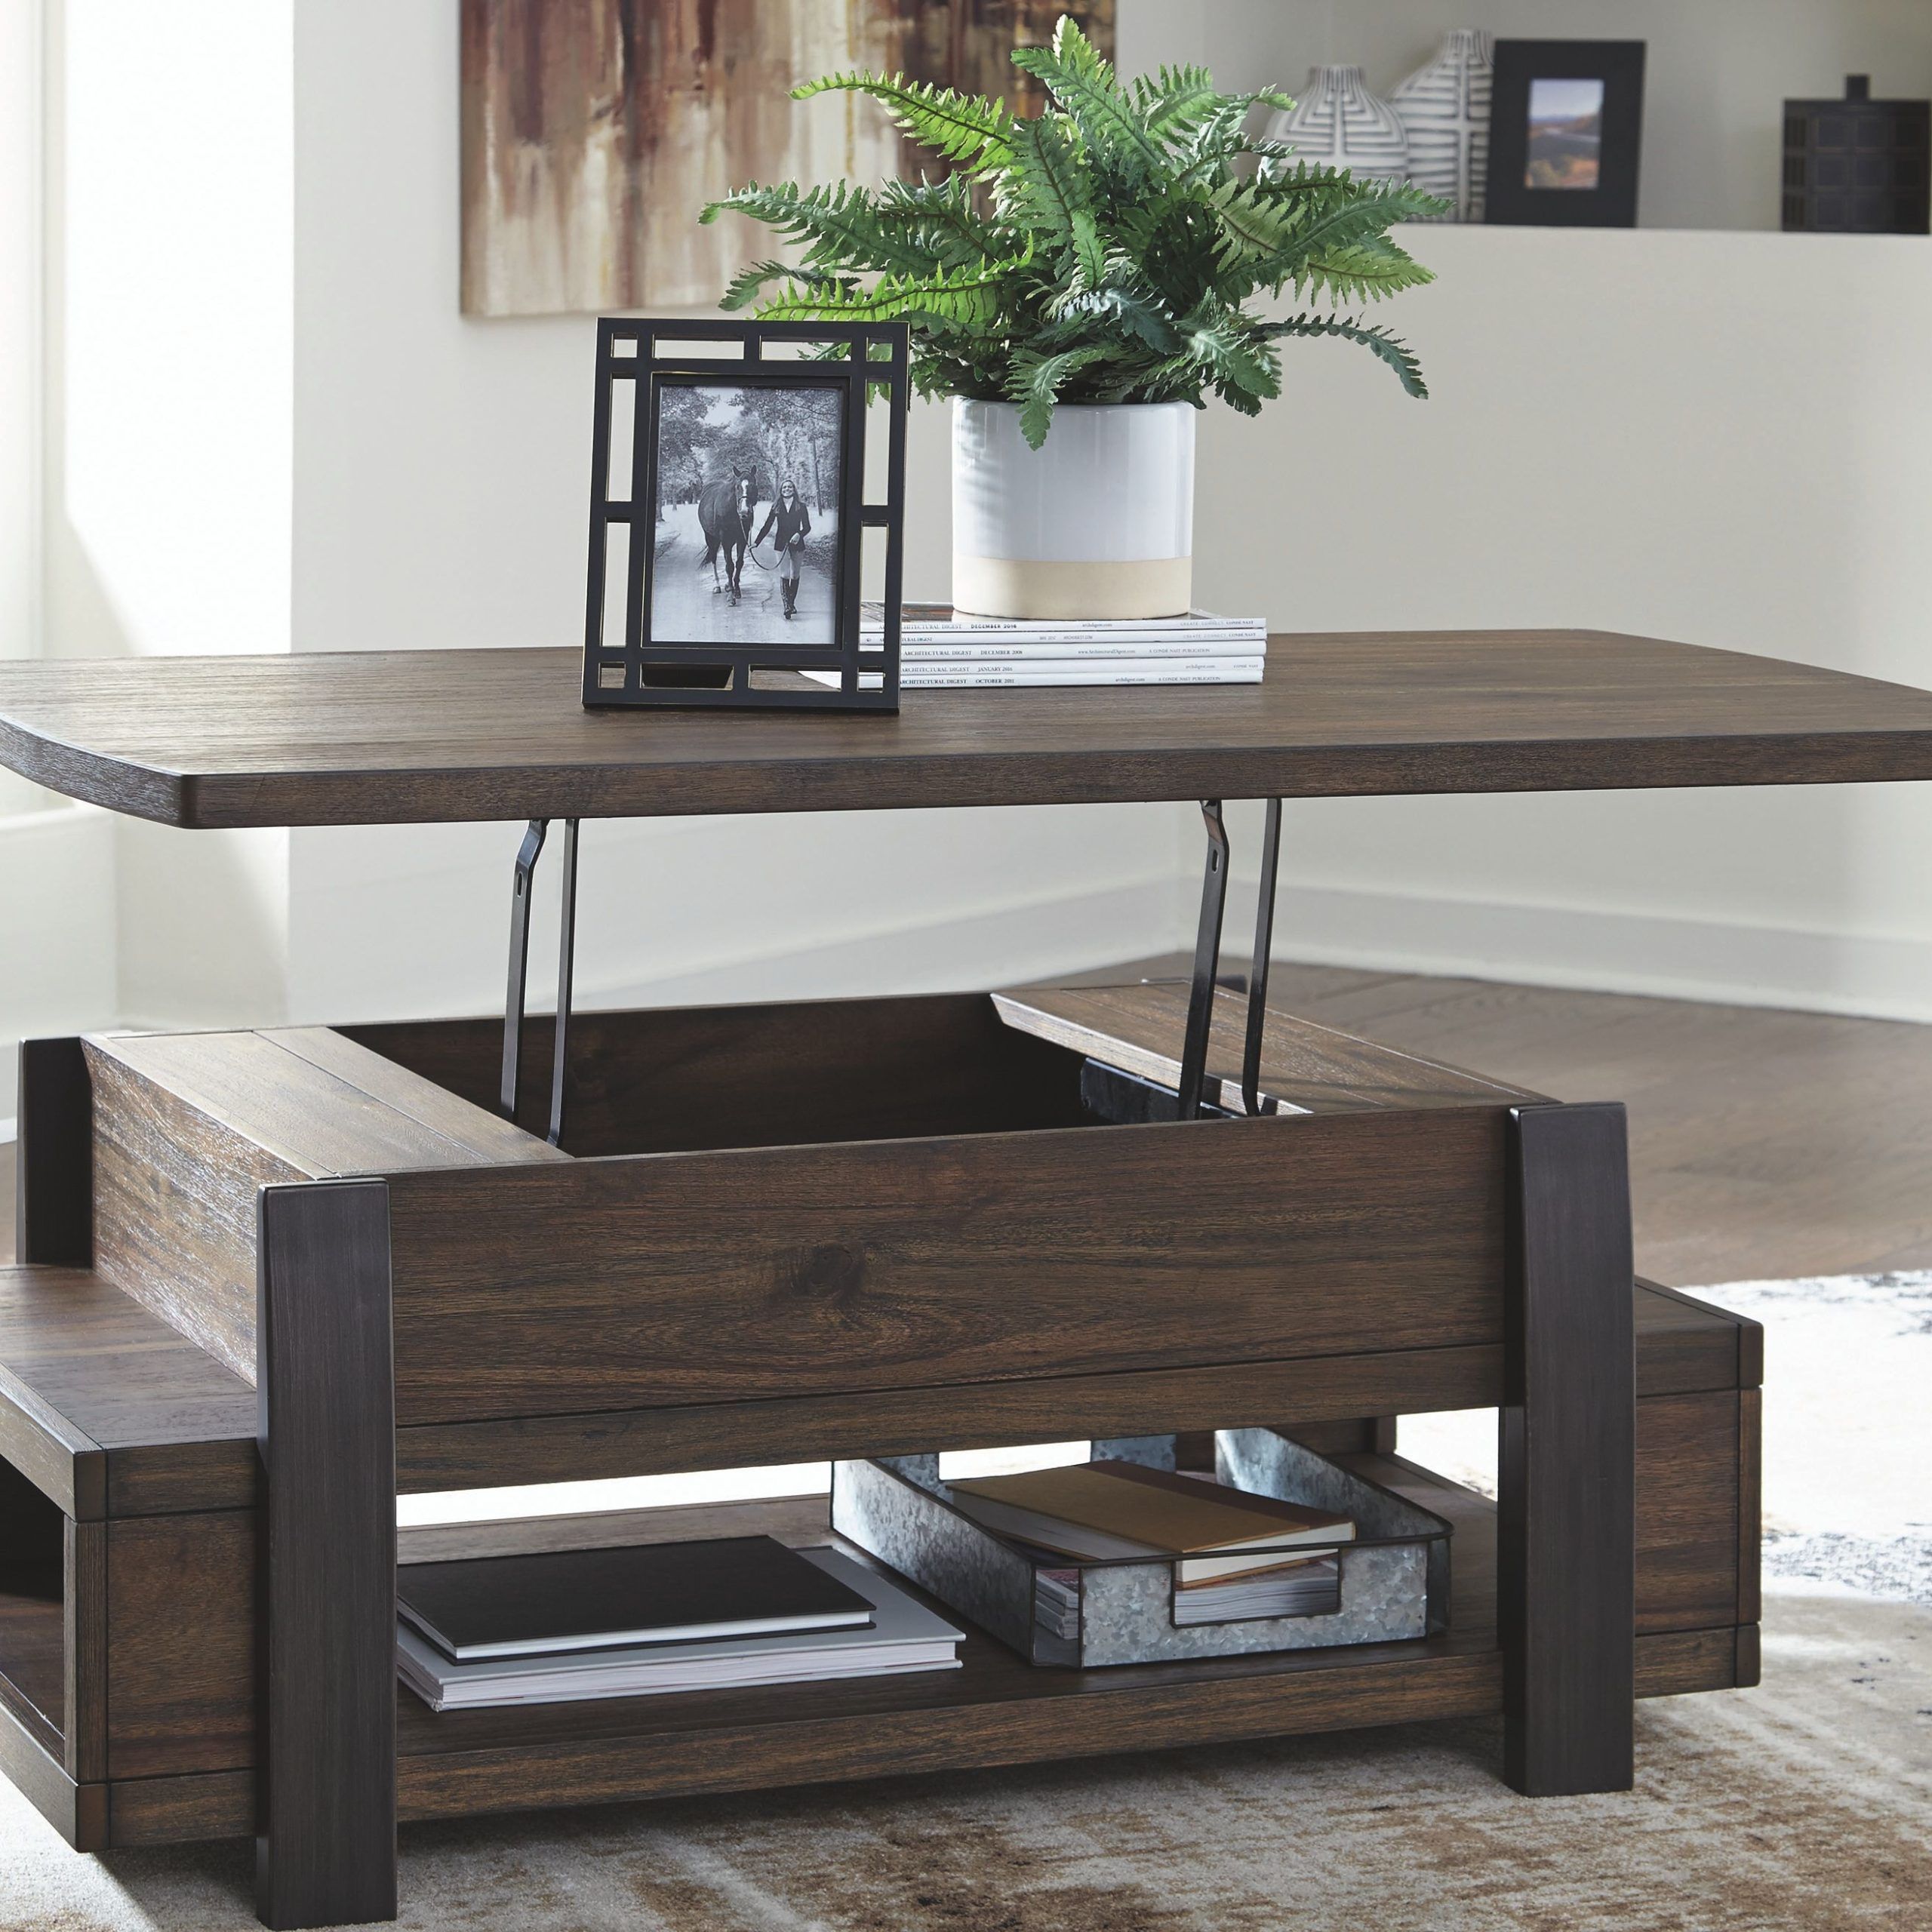 Vailbry Coffee Table With Lift Top, Brown | Lift Top Coffee Table In Wood Lift Top Coffee Tables (Gallery 7 of 20)